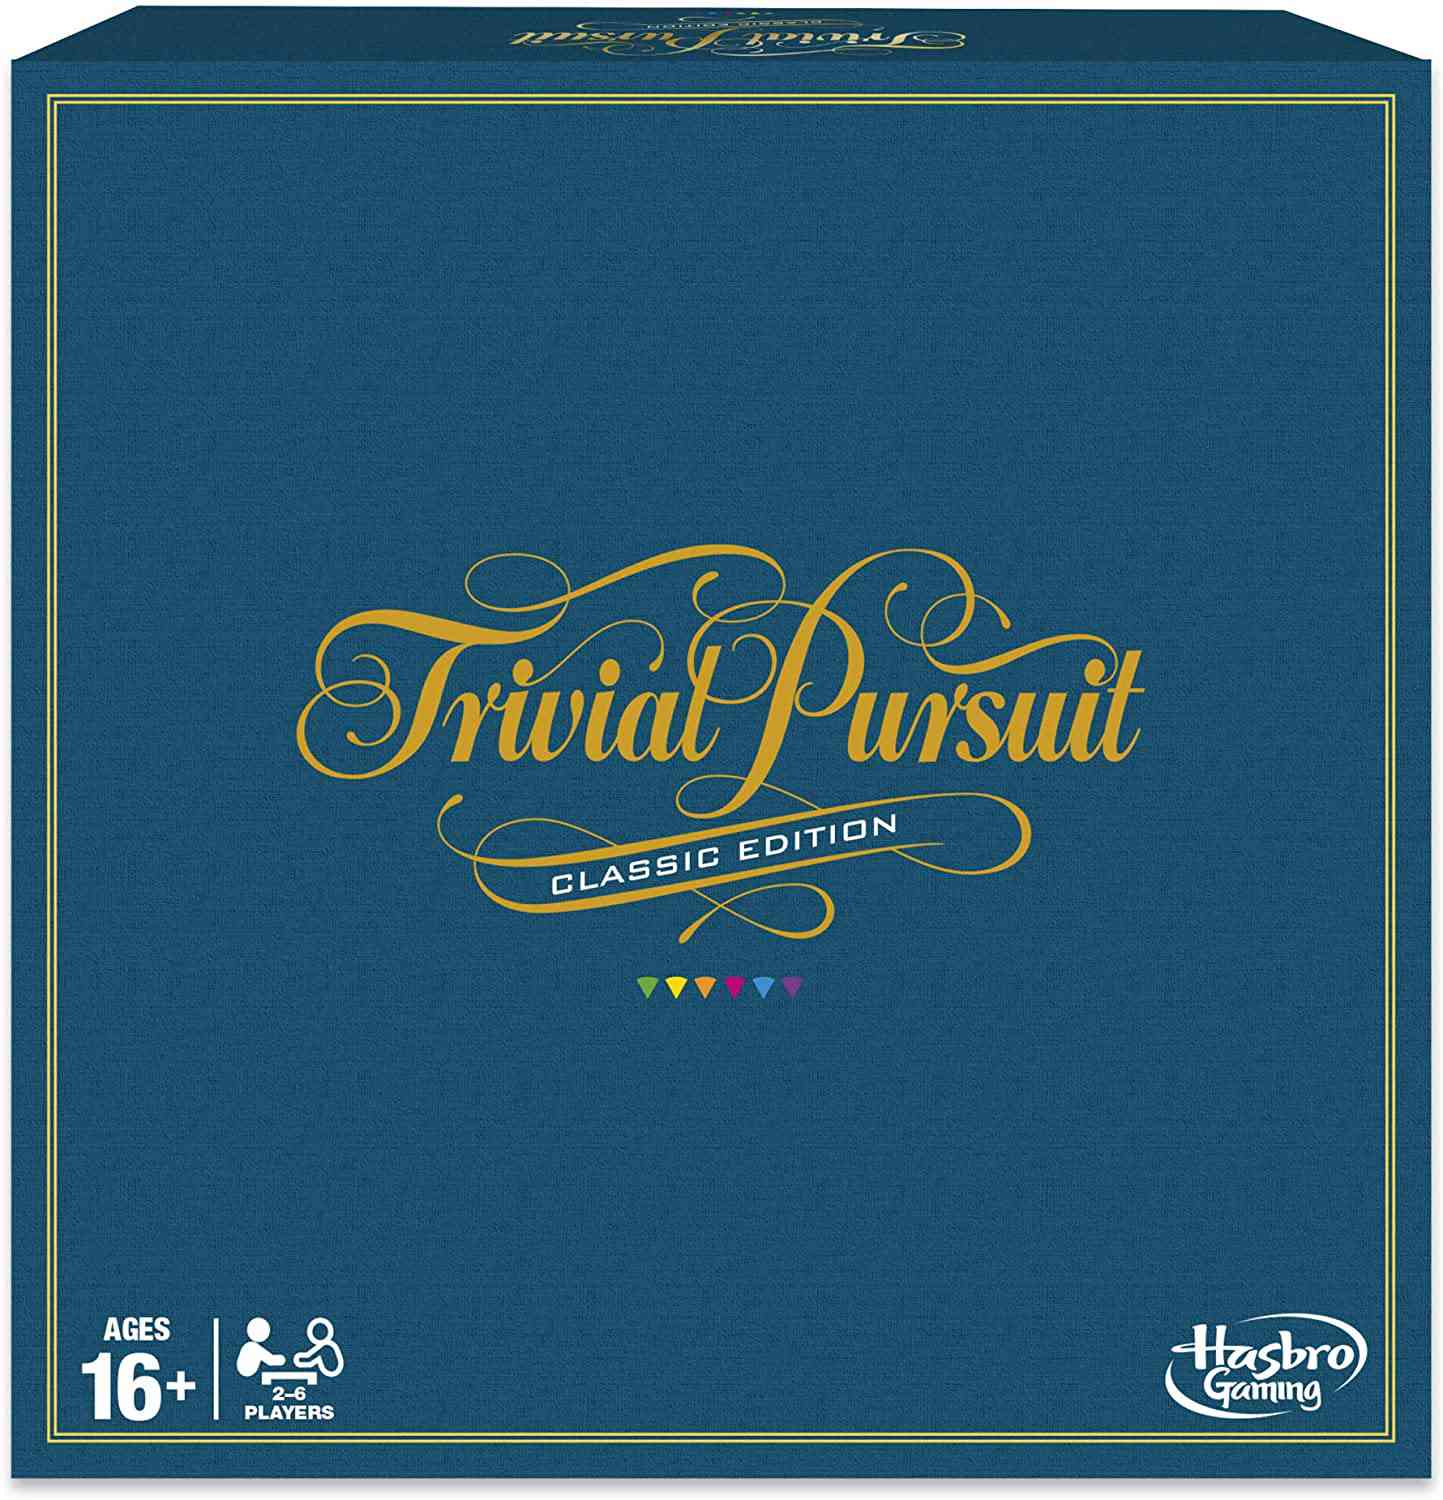 dark blue trivial pursuit box with gold writing